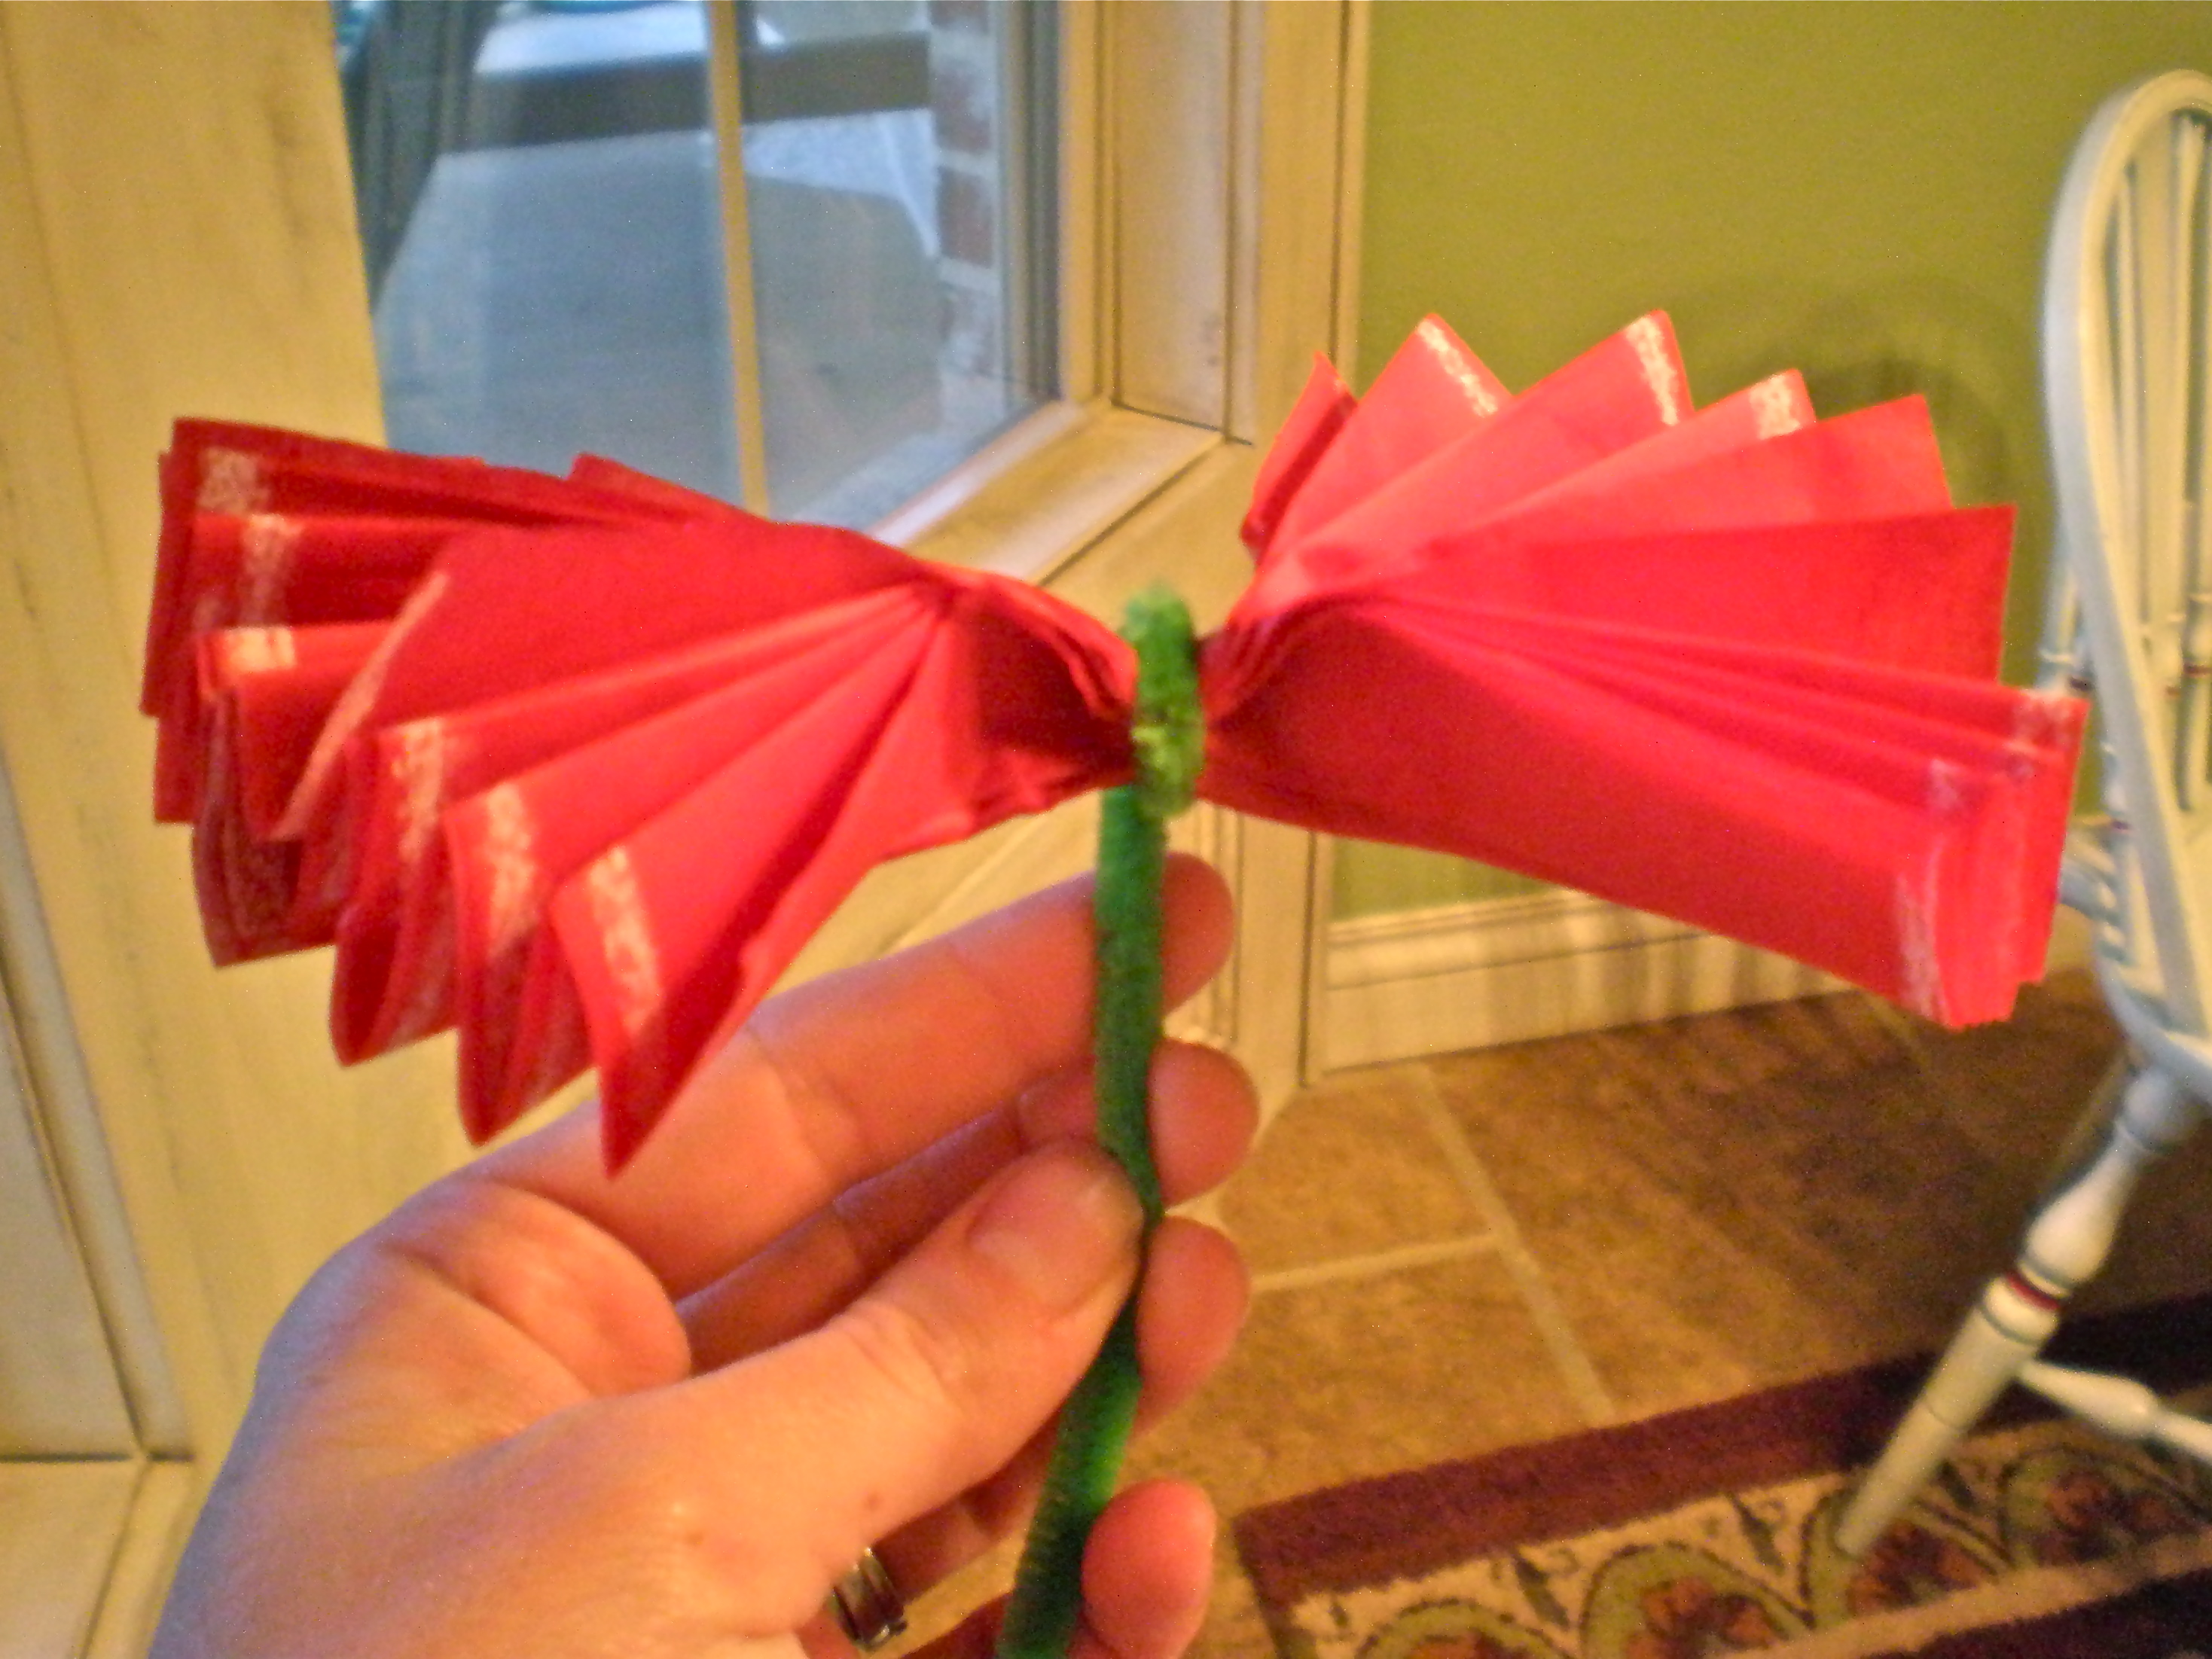 Now its time to fan out the flower Pull and twist the tissue apart to